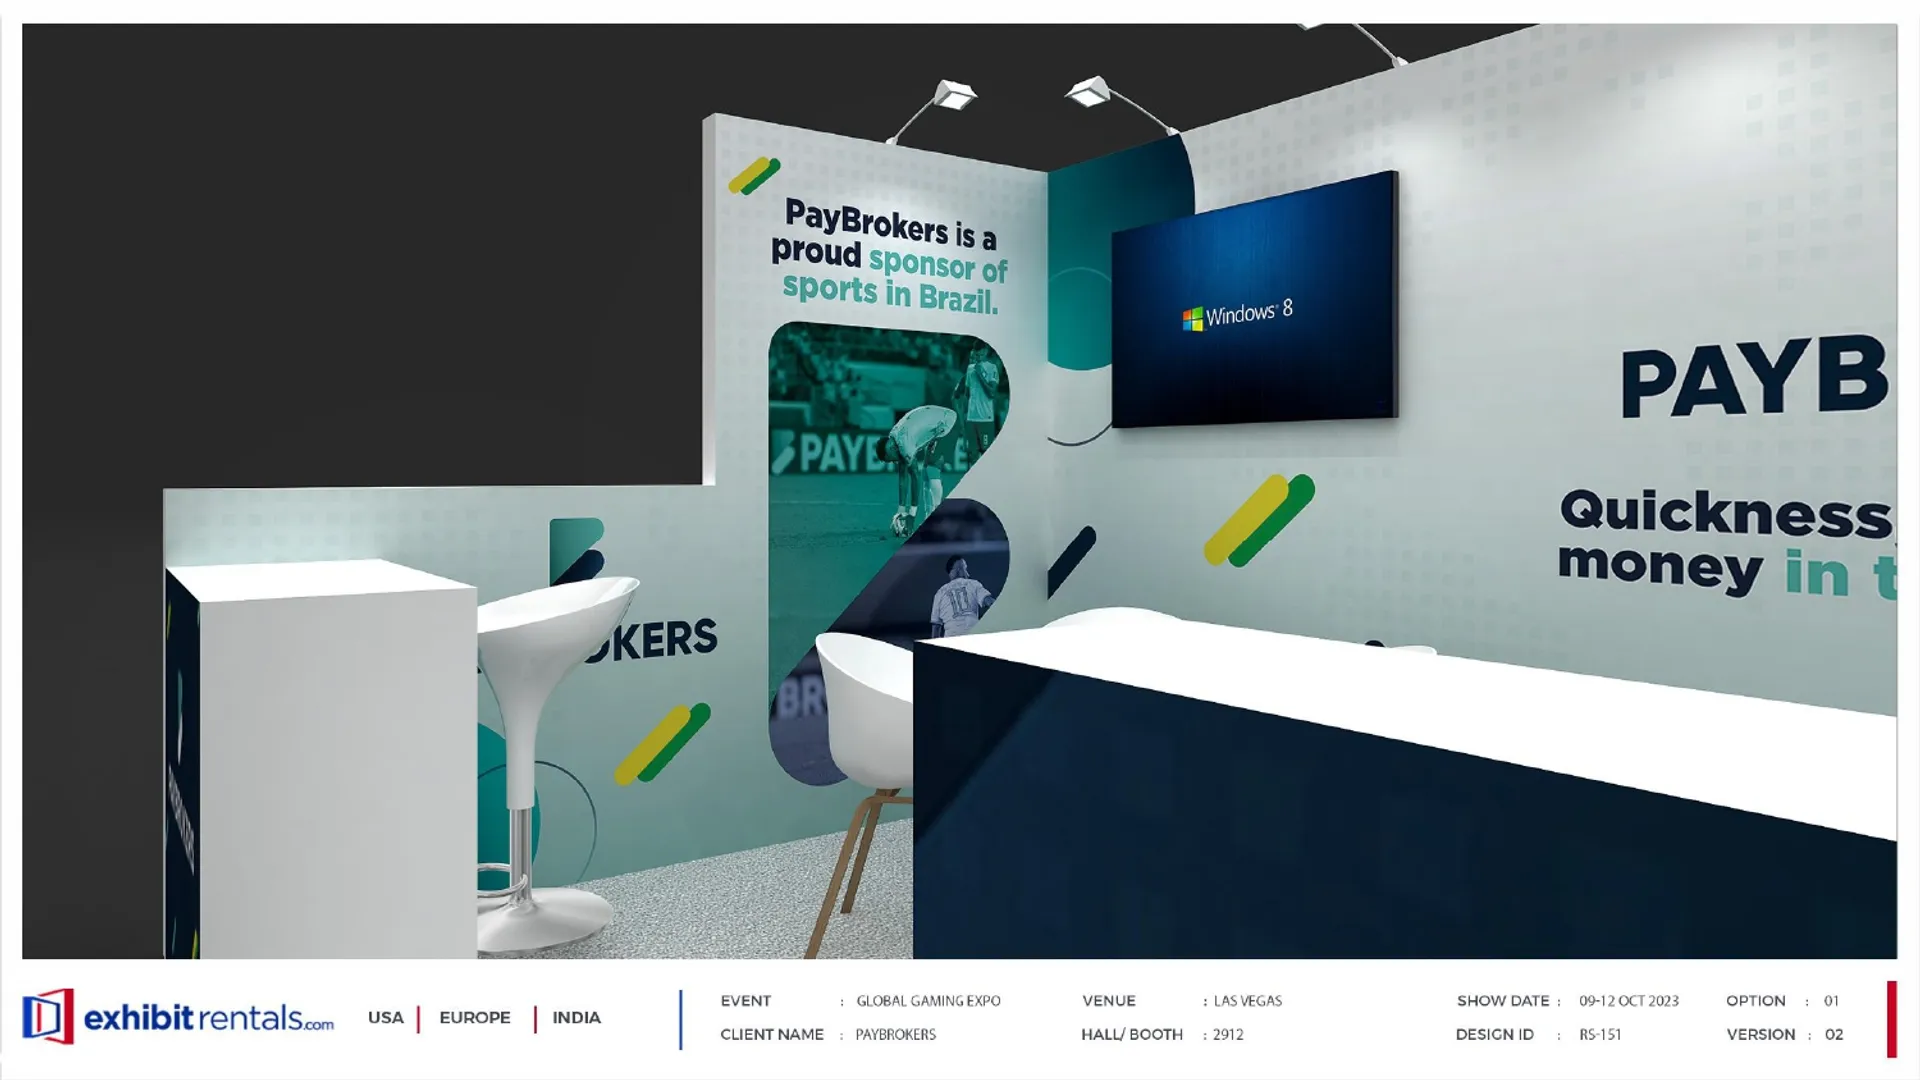 booth-design-projects/Exhibit-Rentals/2024-04-18-10x20-INLINE-Project-103/1.2 - Paybrokers - ER Design Presentation.pptx-14_page-0001 (1)-9q4qm.jpg